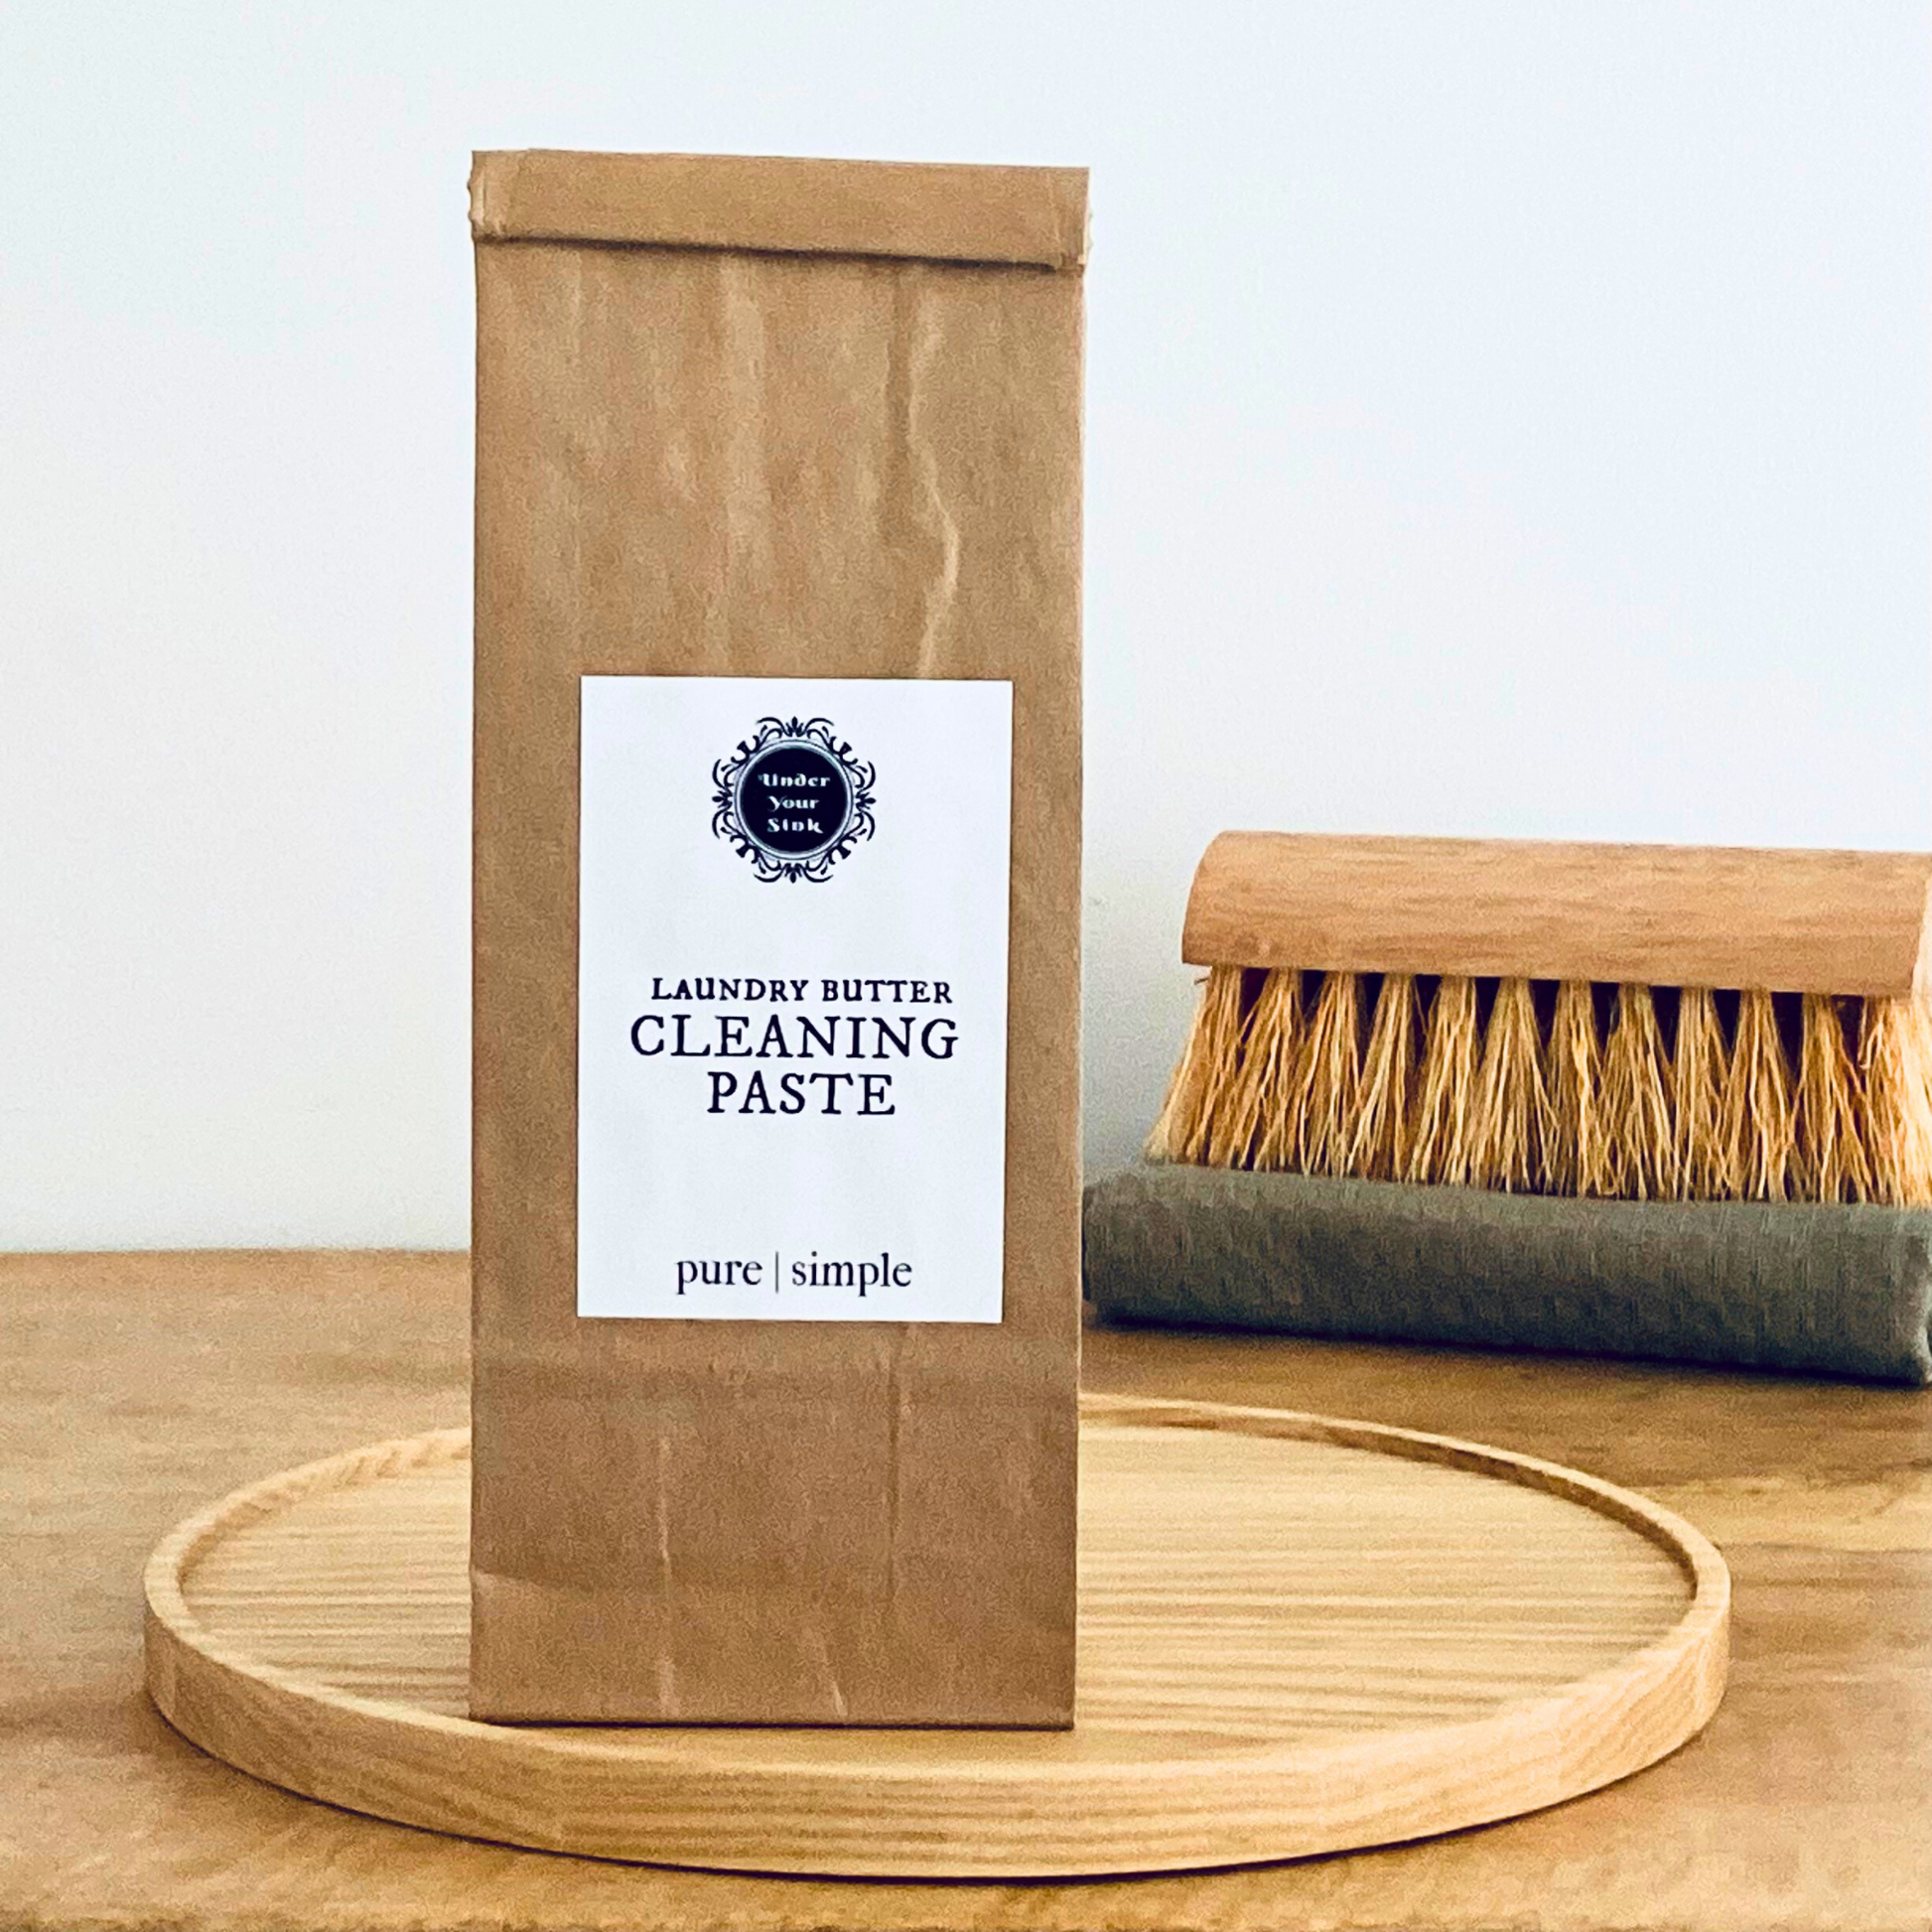 Handmade Cleaning Paste Mix for sale in stylish  eco paper bag for natural zero waste cleaning. This is to make a cleaning paste like gumption